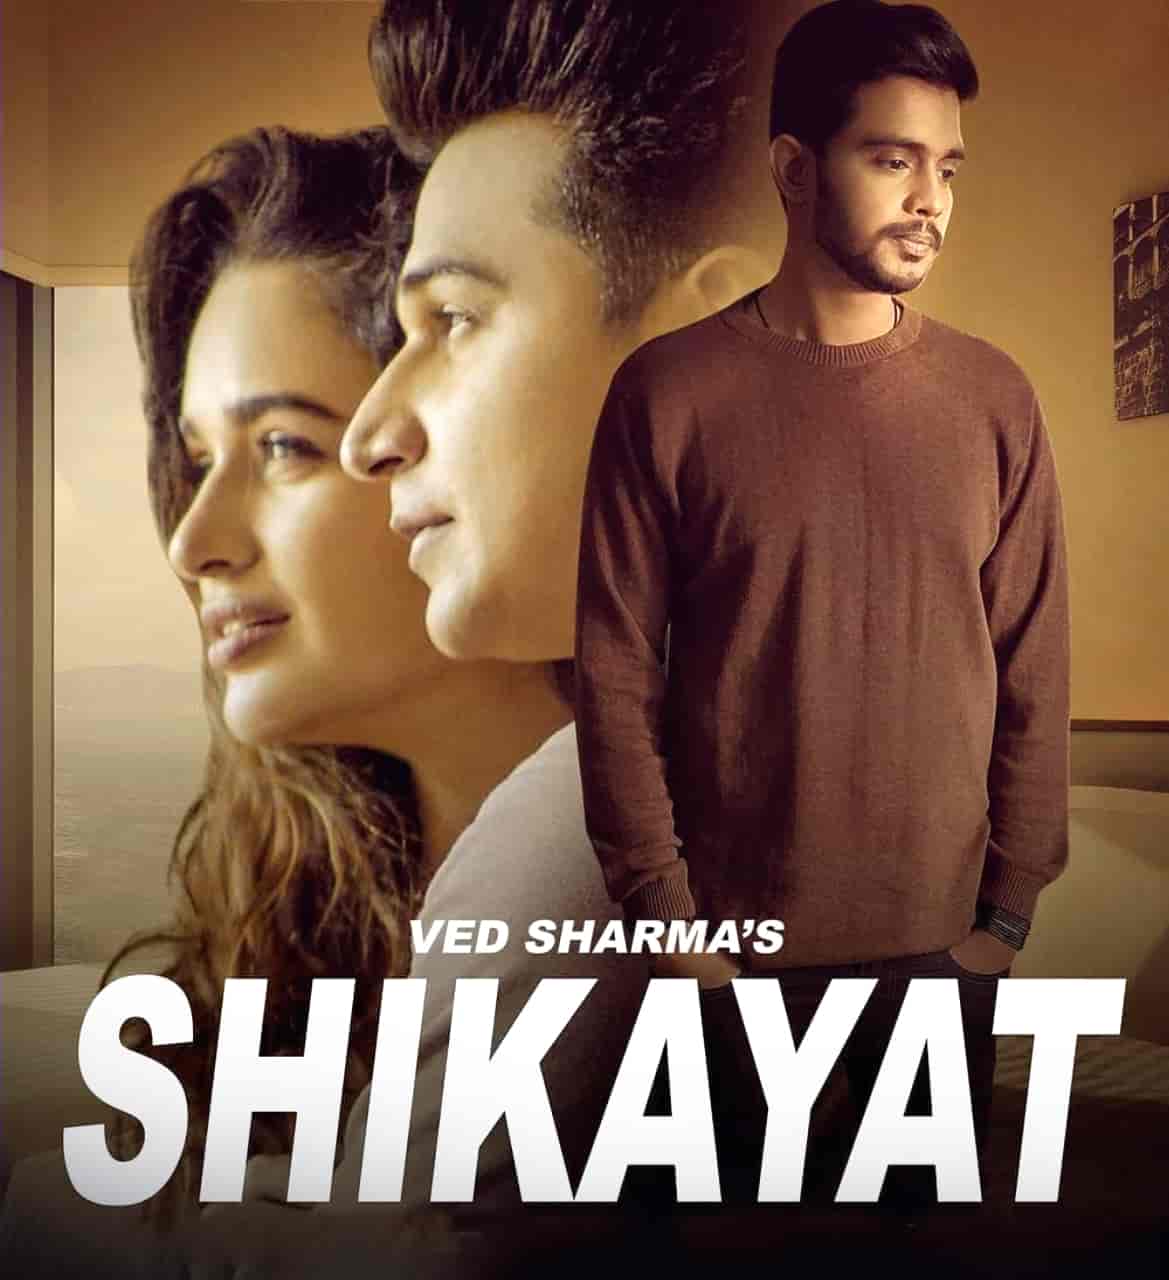 Shikayat Song Image Features Prince Narula sung by Ved Sharma